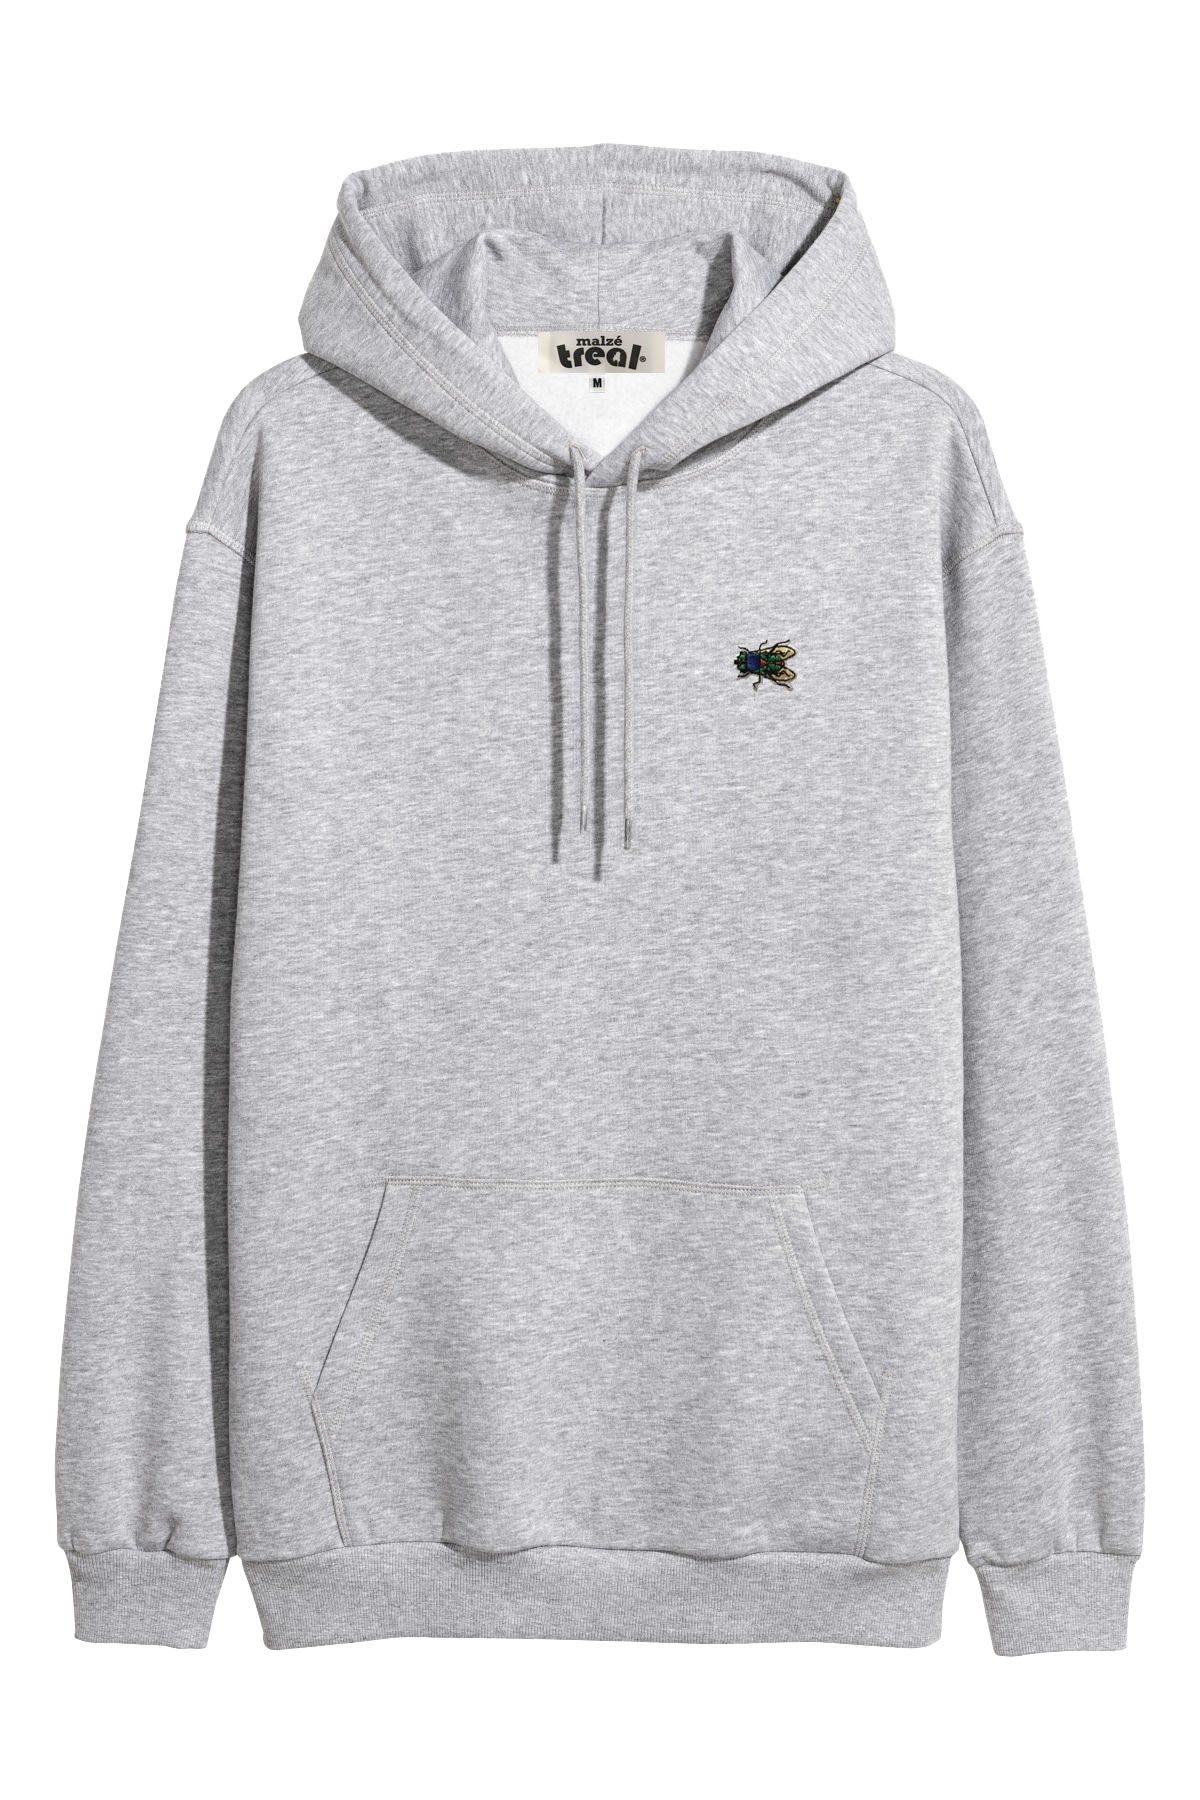 Malzé Treal Embroidered pullover